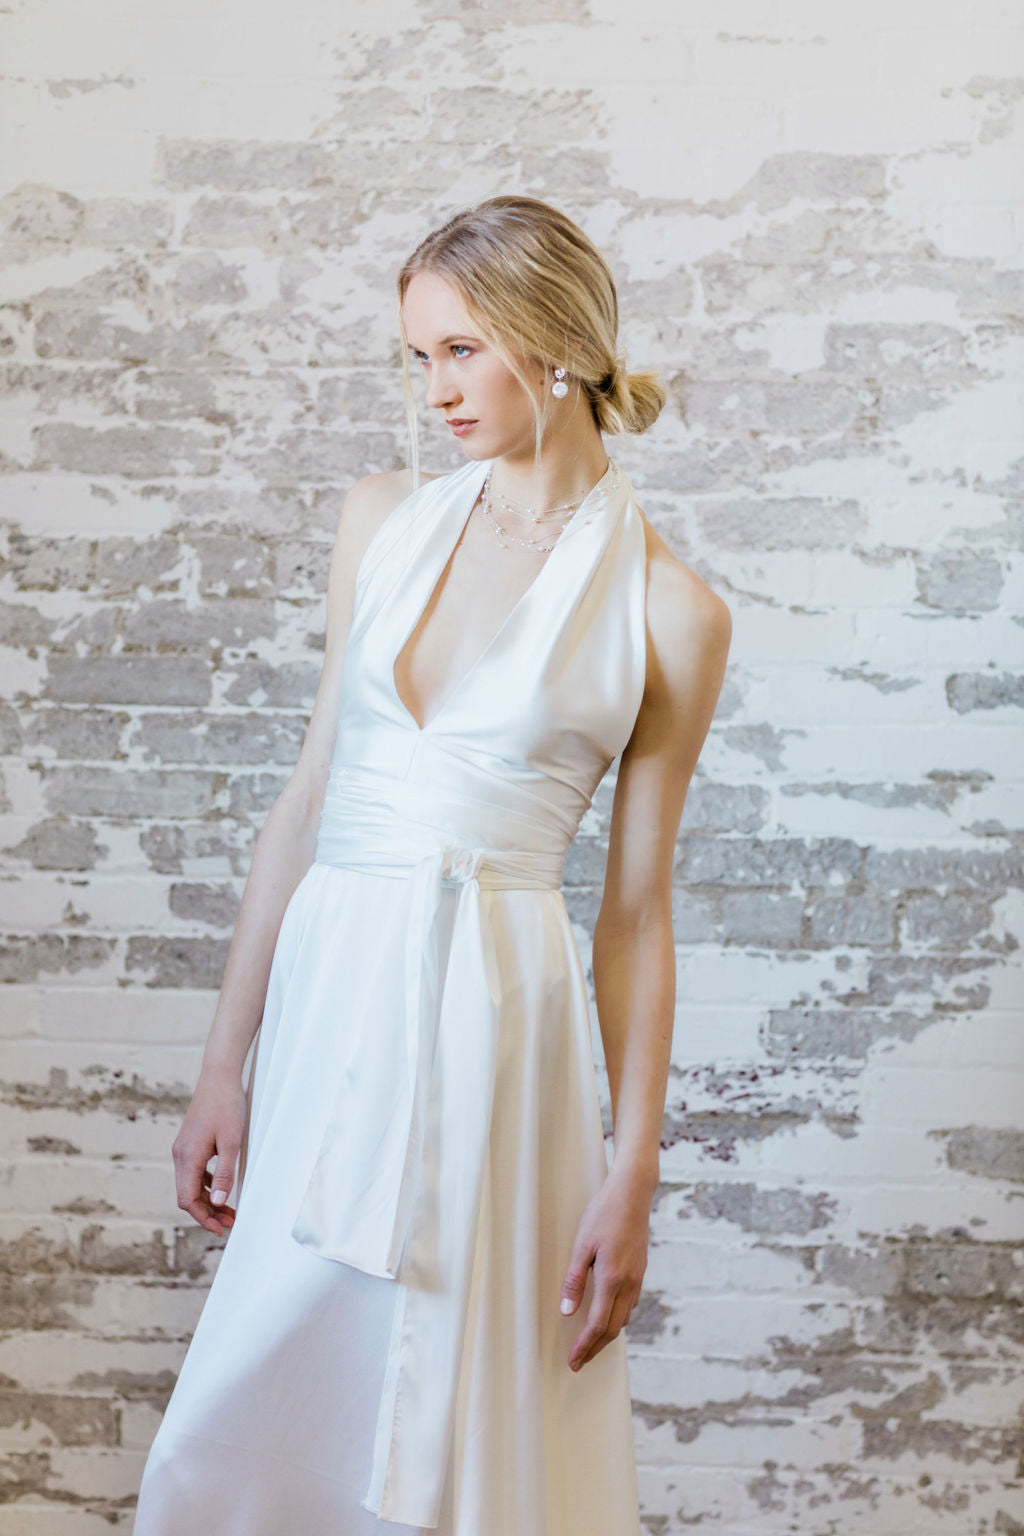 Satin bridal skirt. Modern bridal separates. Made in Toronto, Canada by Catherine Langlois.